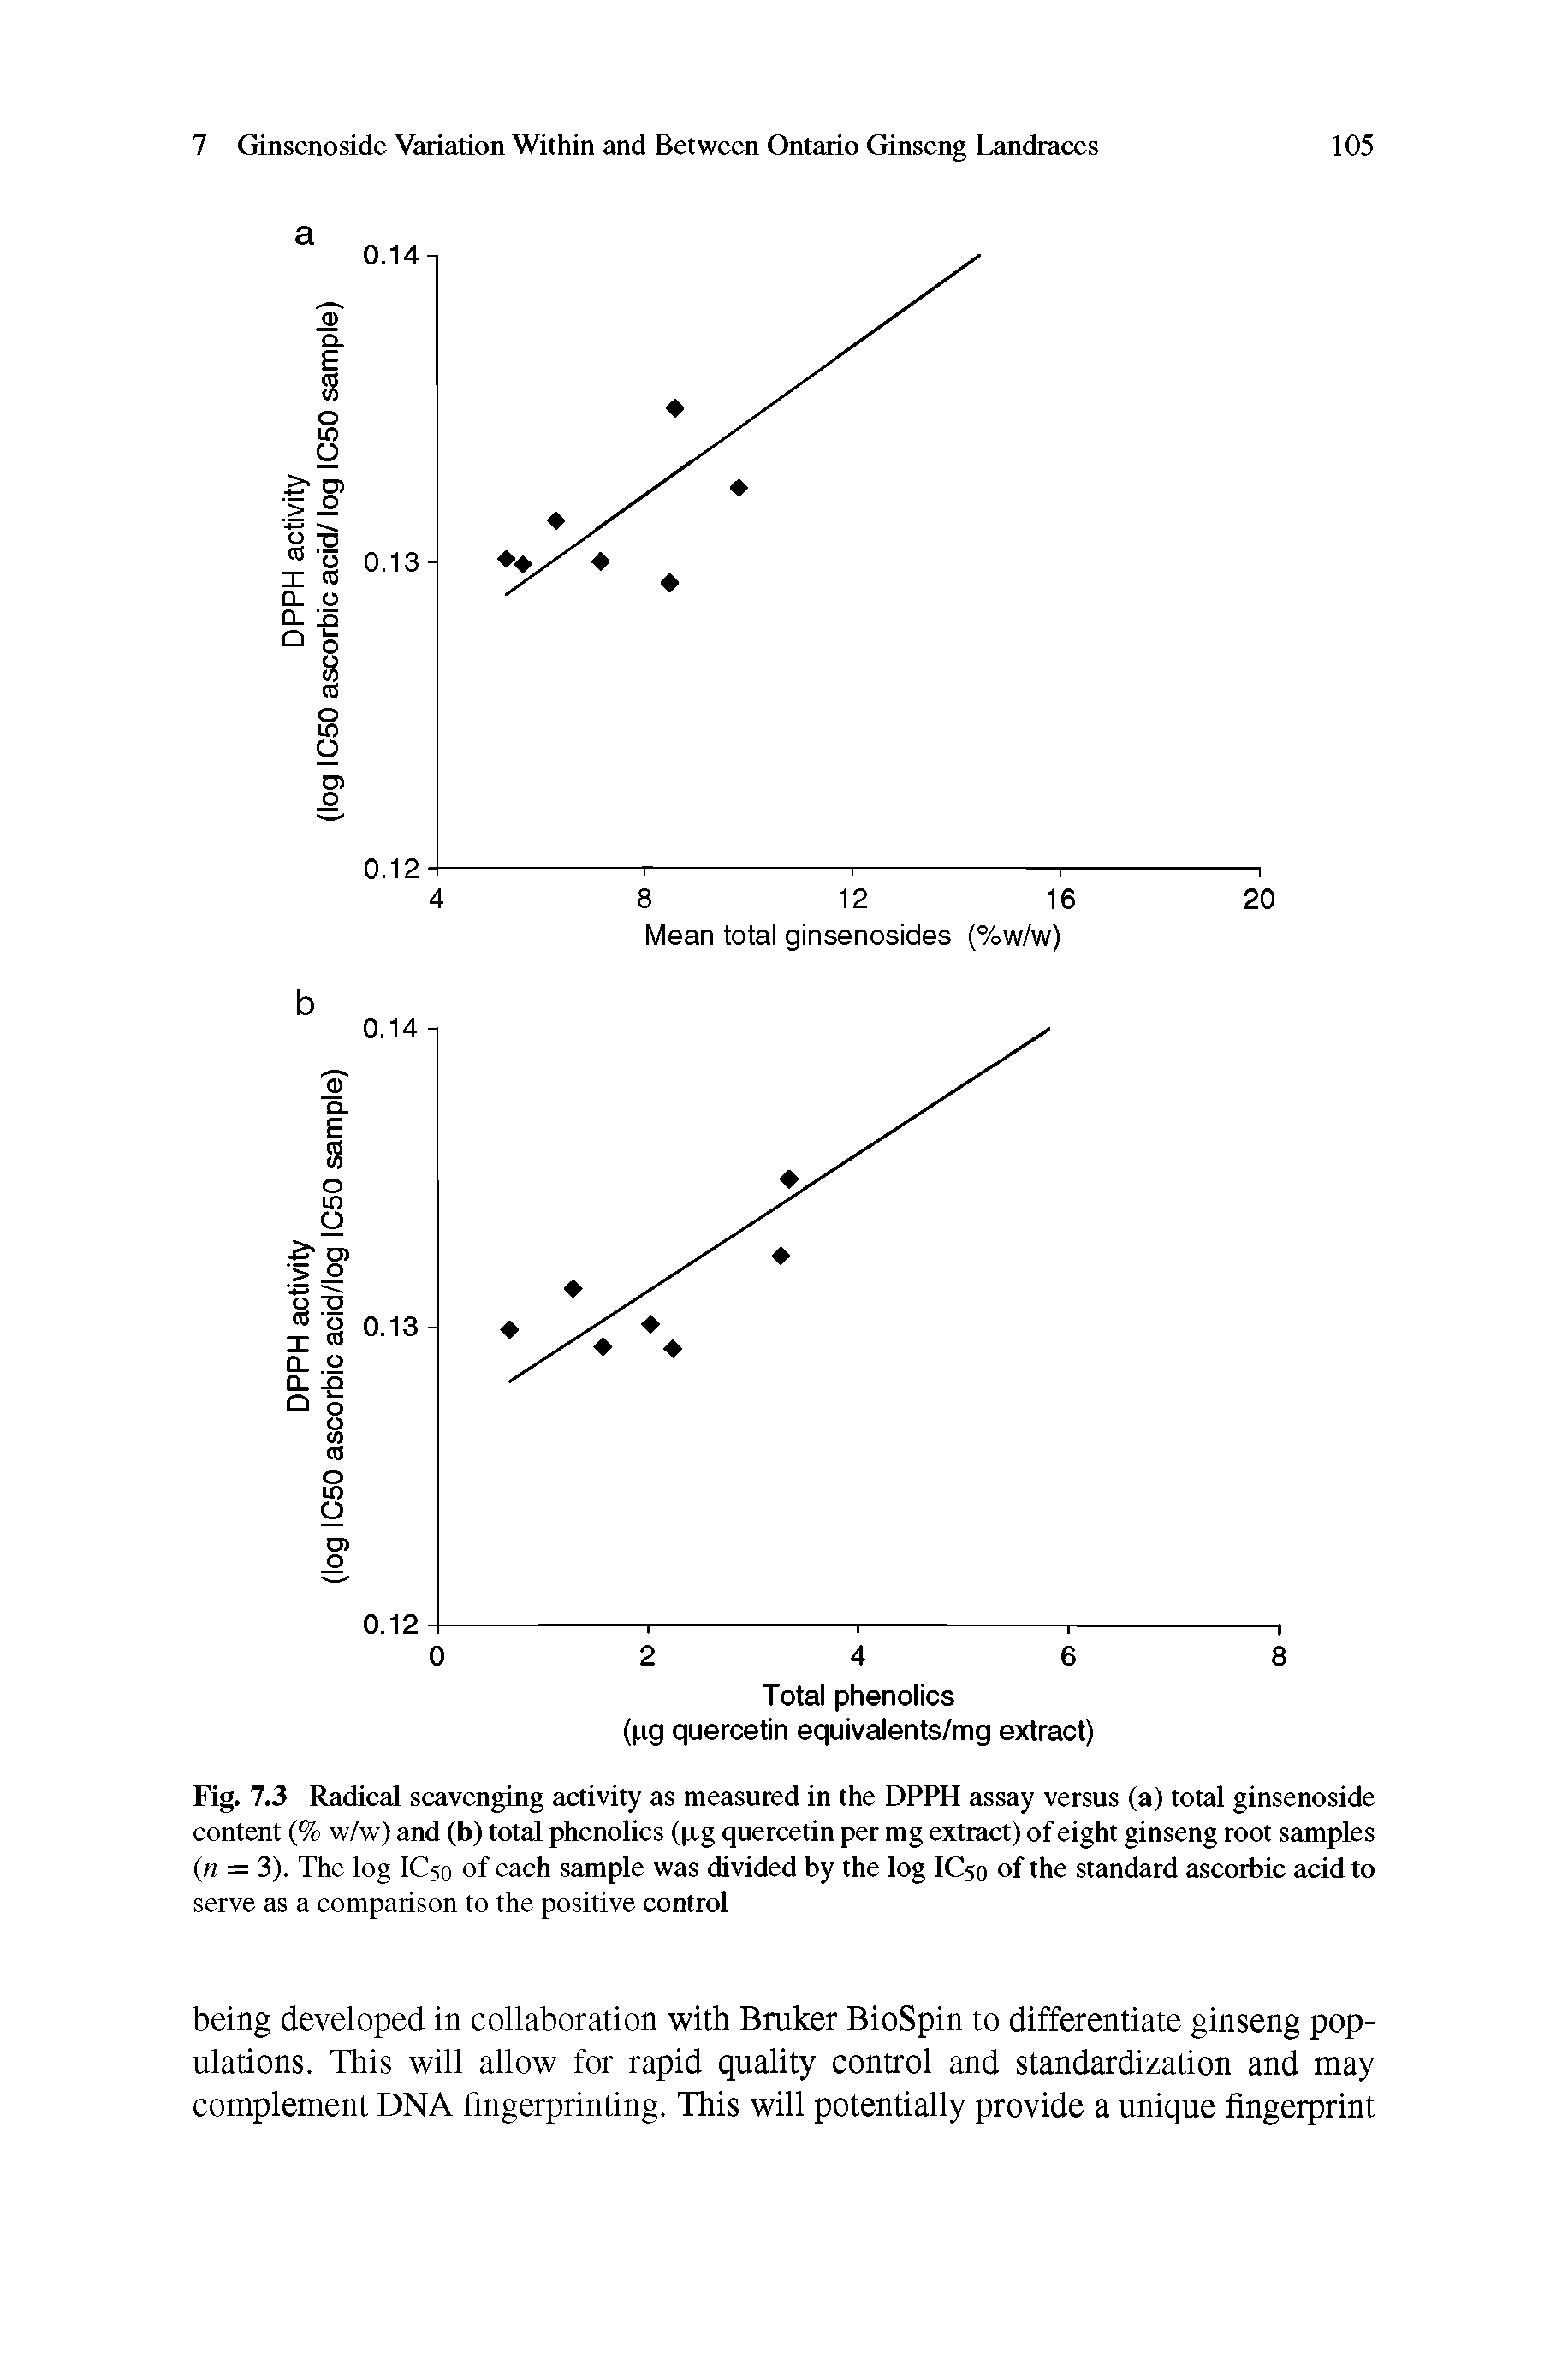 Fig. 7.3 Radical scavenging activity as measured in the DPPH assay versus (a) total ginsenoside content (% w/w) and (b) total phenolics (pg quercetin per mg extract) of eight ginseng root samples (n = 3). The log IC50 of each sample was divided by the log IC50 of the standard ascorbic acid to...